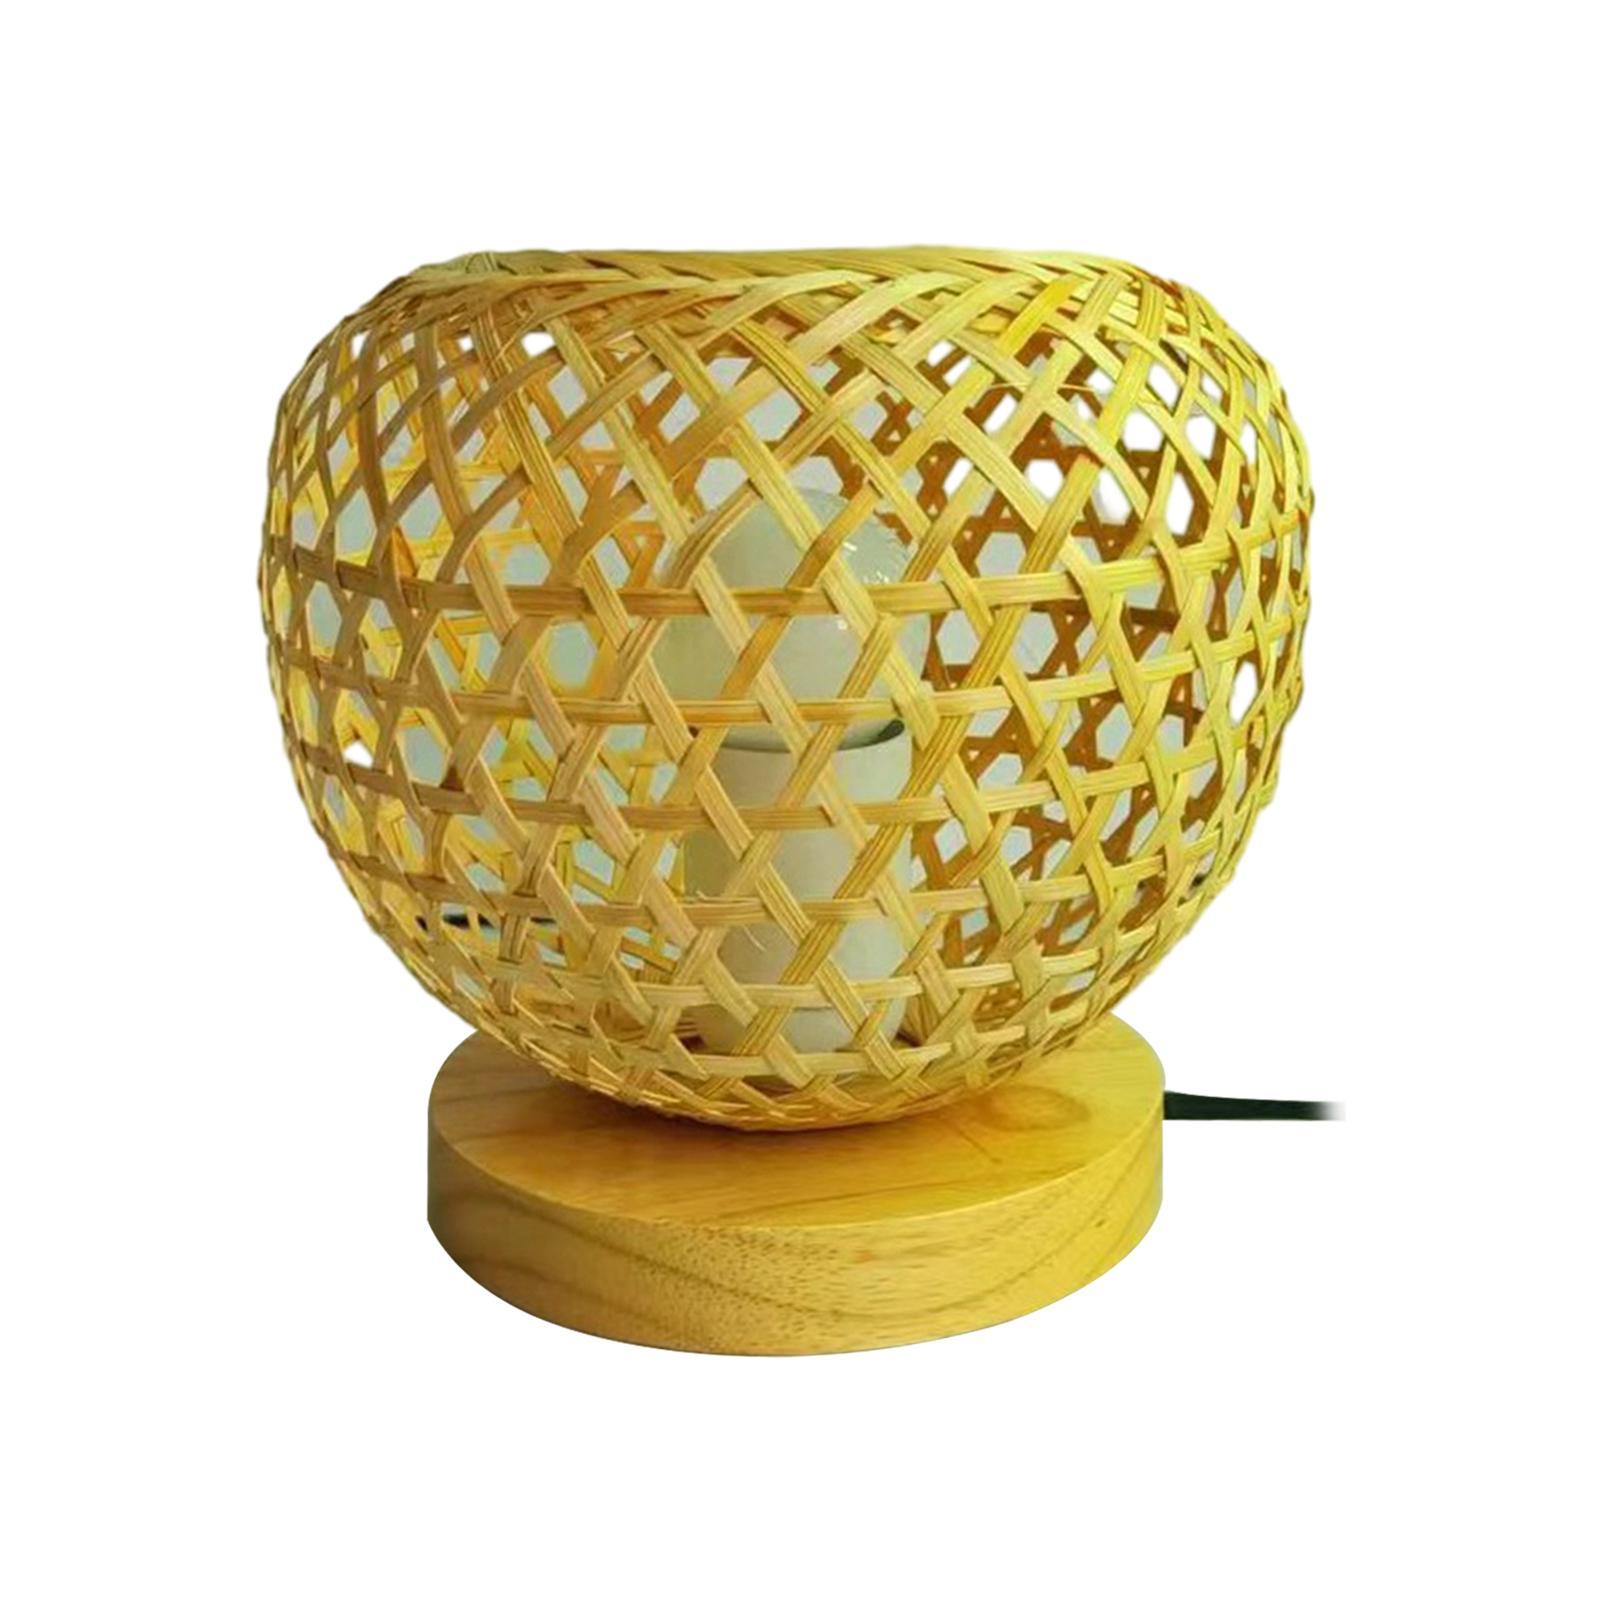 Bamboo Table Lamps Beside Lamp Reading Light Retro Decorative Desk Lamp Rattan Table Lamp for Living Room Tabletop Home Study Room Bedroom